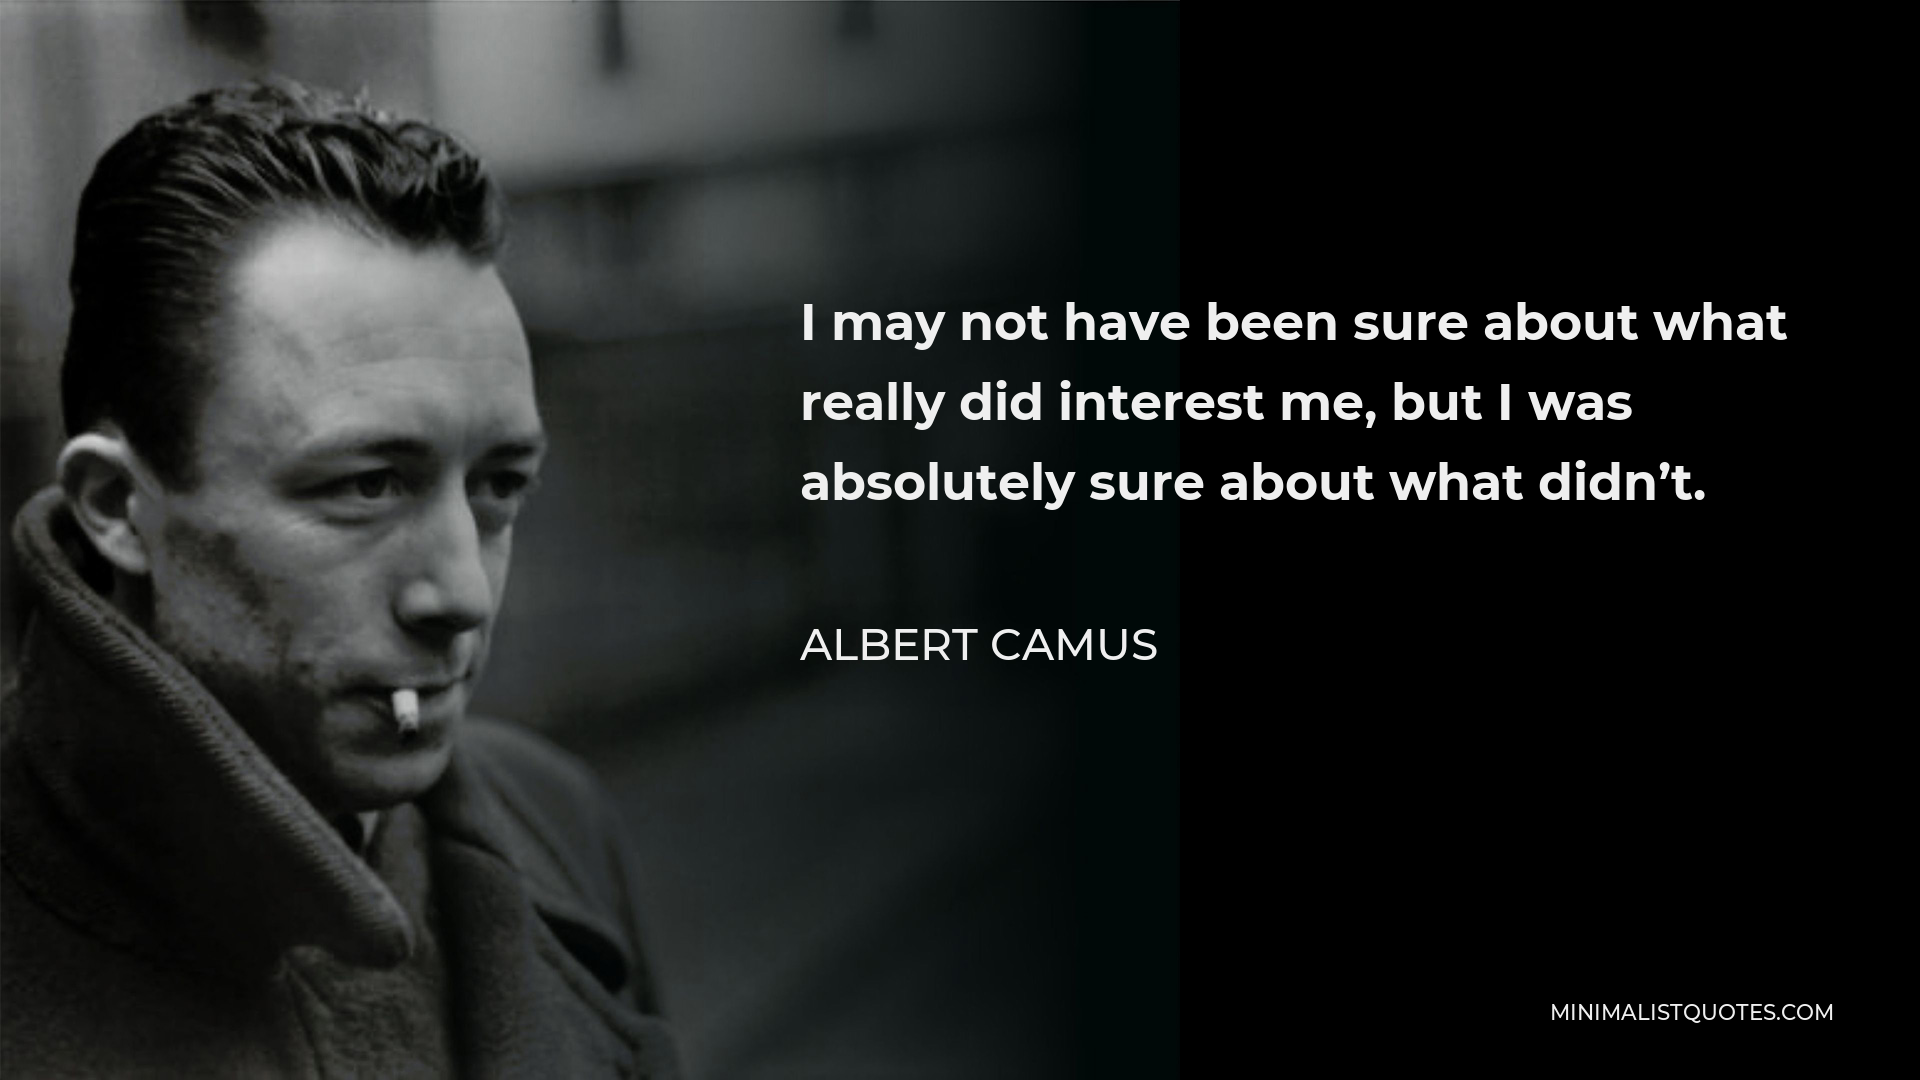 Albert Camus Quote - I may not have been sure about what really did interest me, but I was absolutely sure about what didn’t.